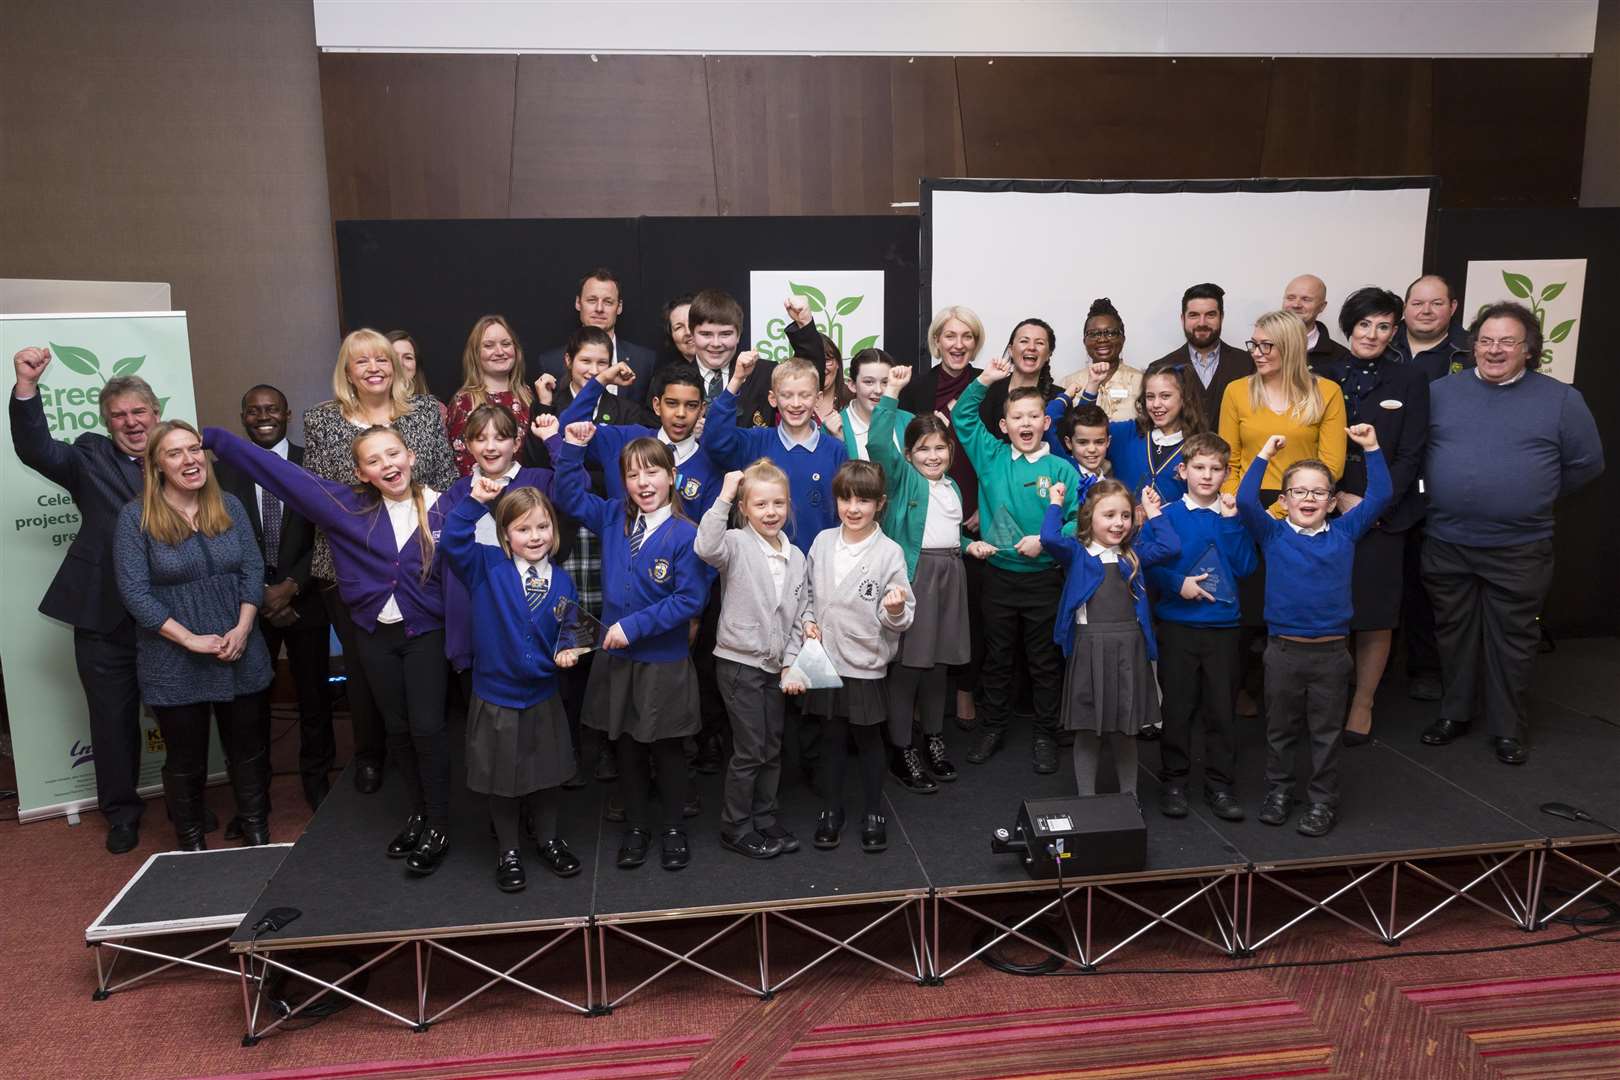 London and South East Green School Awards Champions 2019 plus supporters celebrate at the Ashford International Hotel.